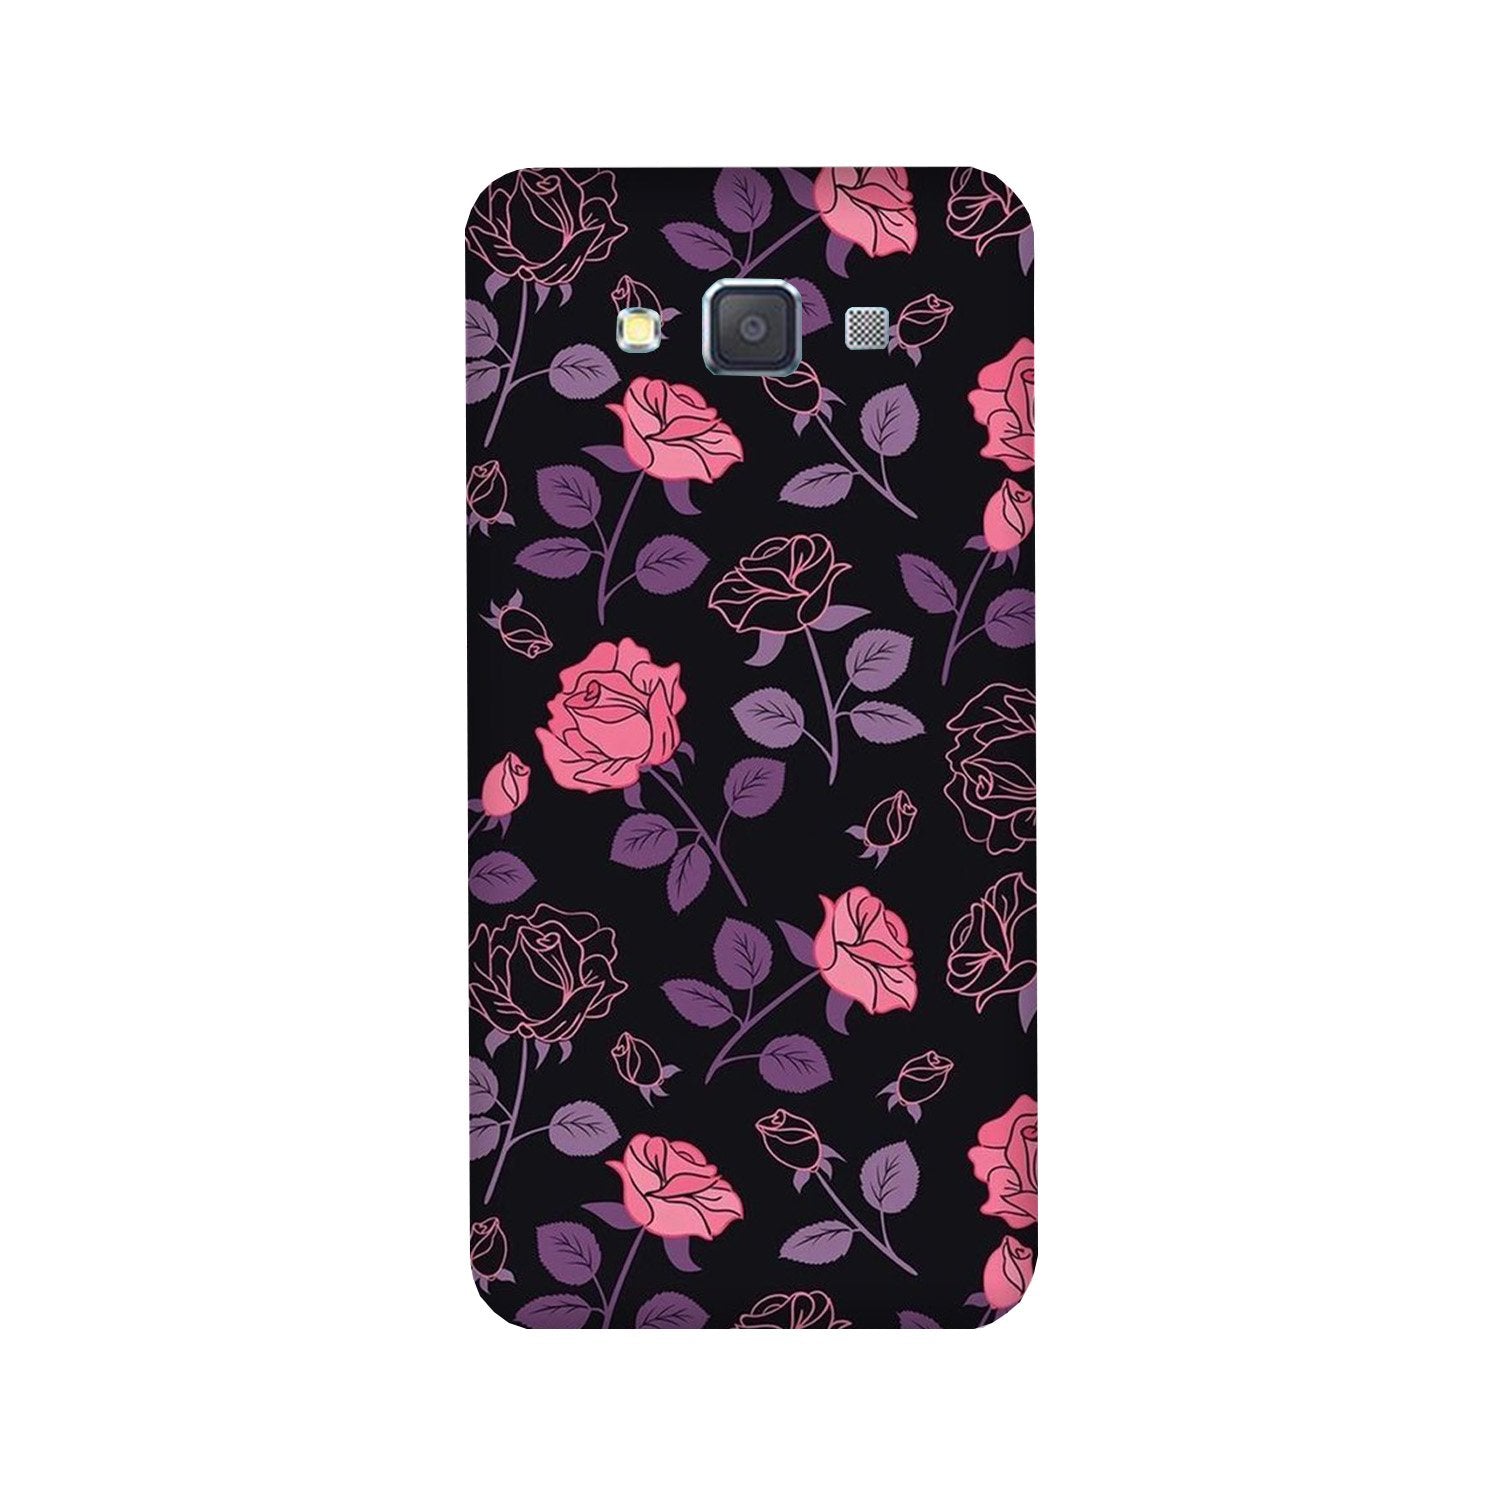 Rose Black Background Case for Galaxy ON7/ON7 Pro